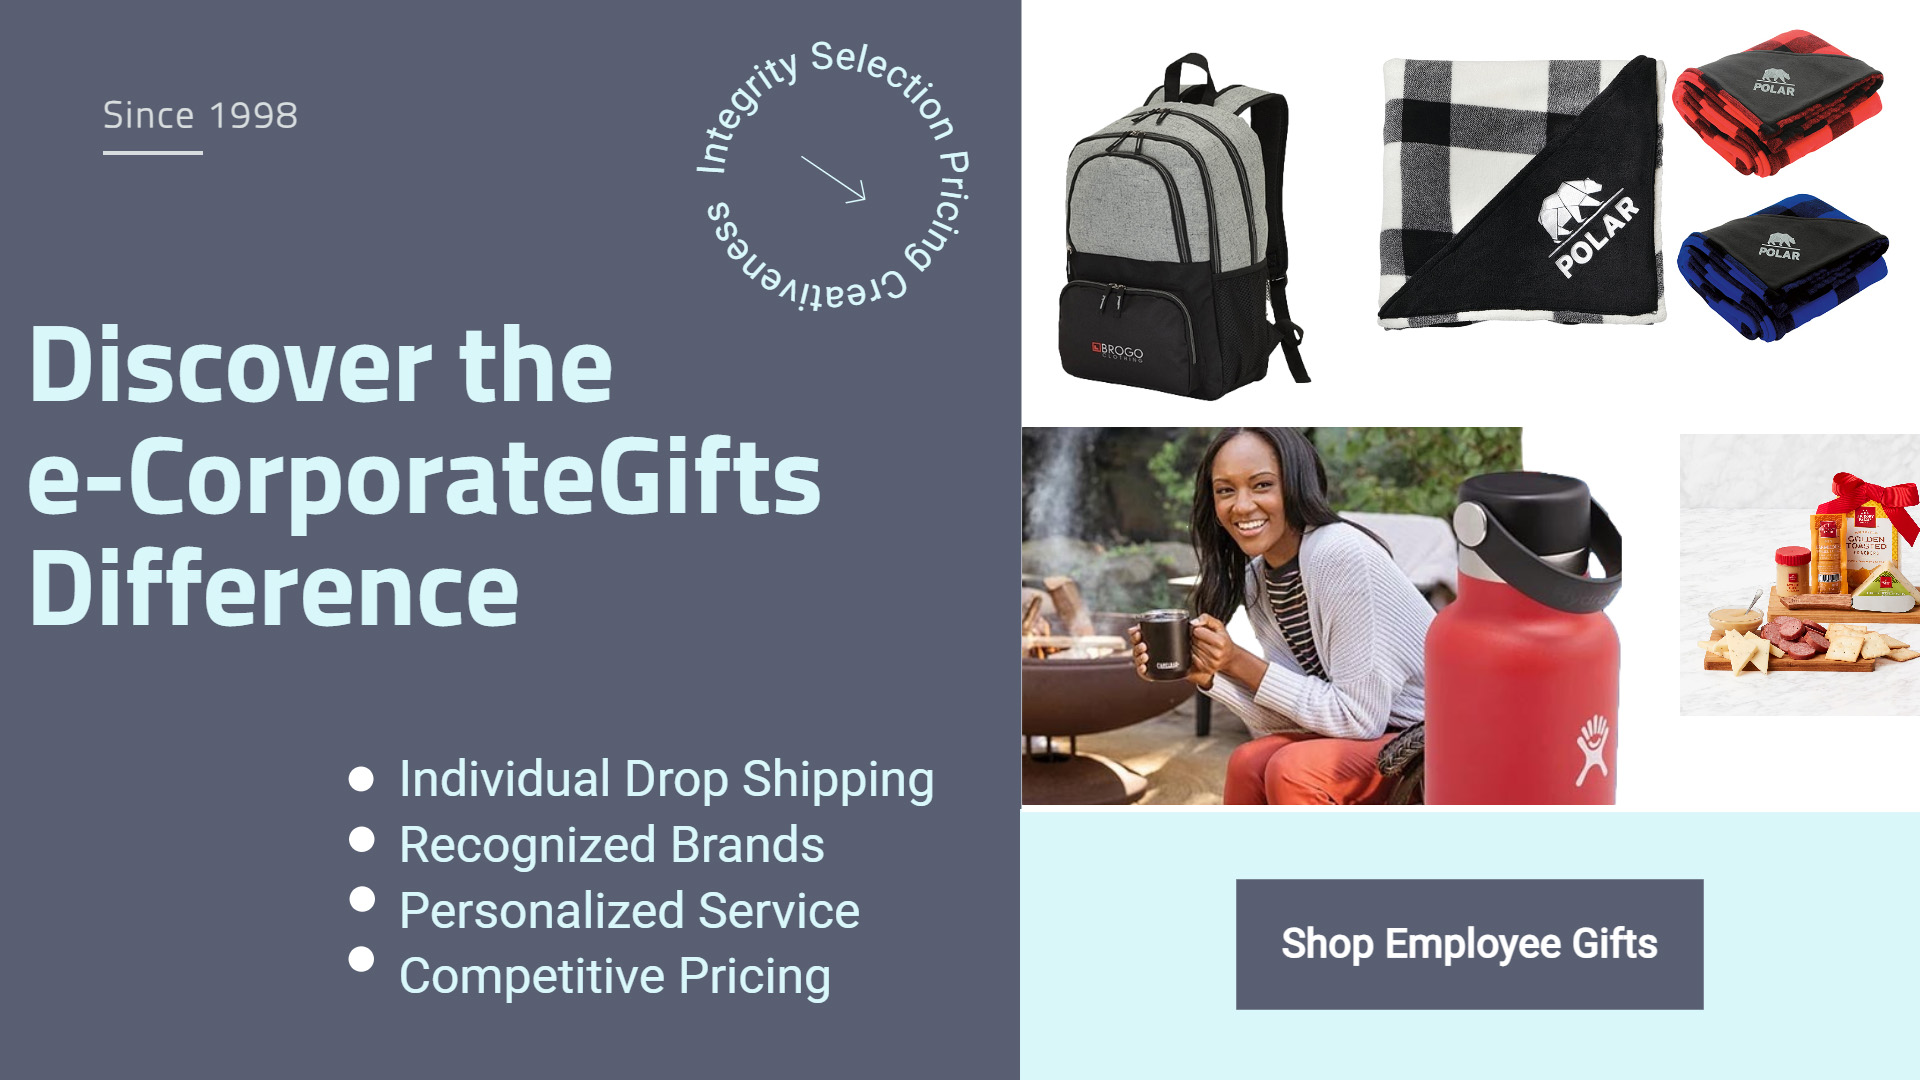 30 Best Employee Gifts - Ultimate Corporate Gift Guide For 2021 | Employee  gifts, Employee holiday gifts, Holiday office gifts